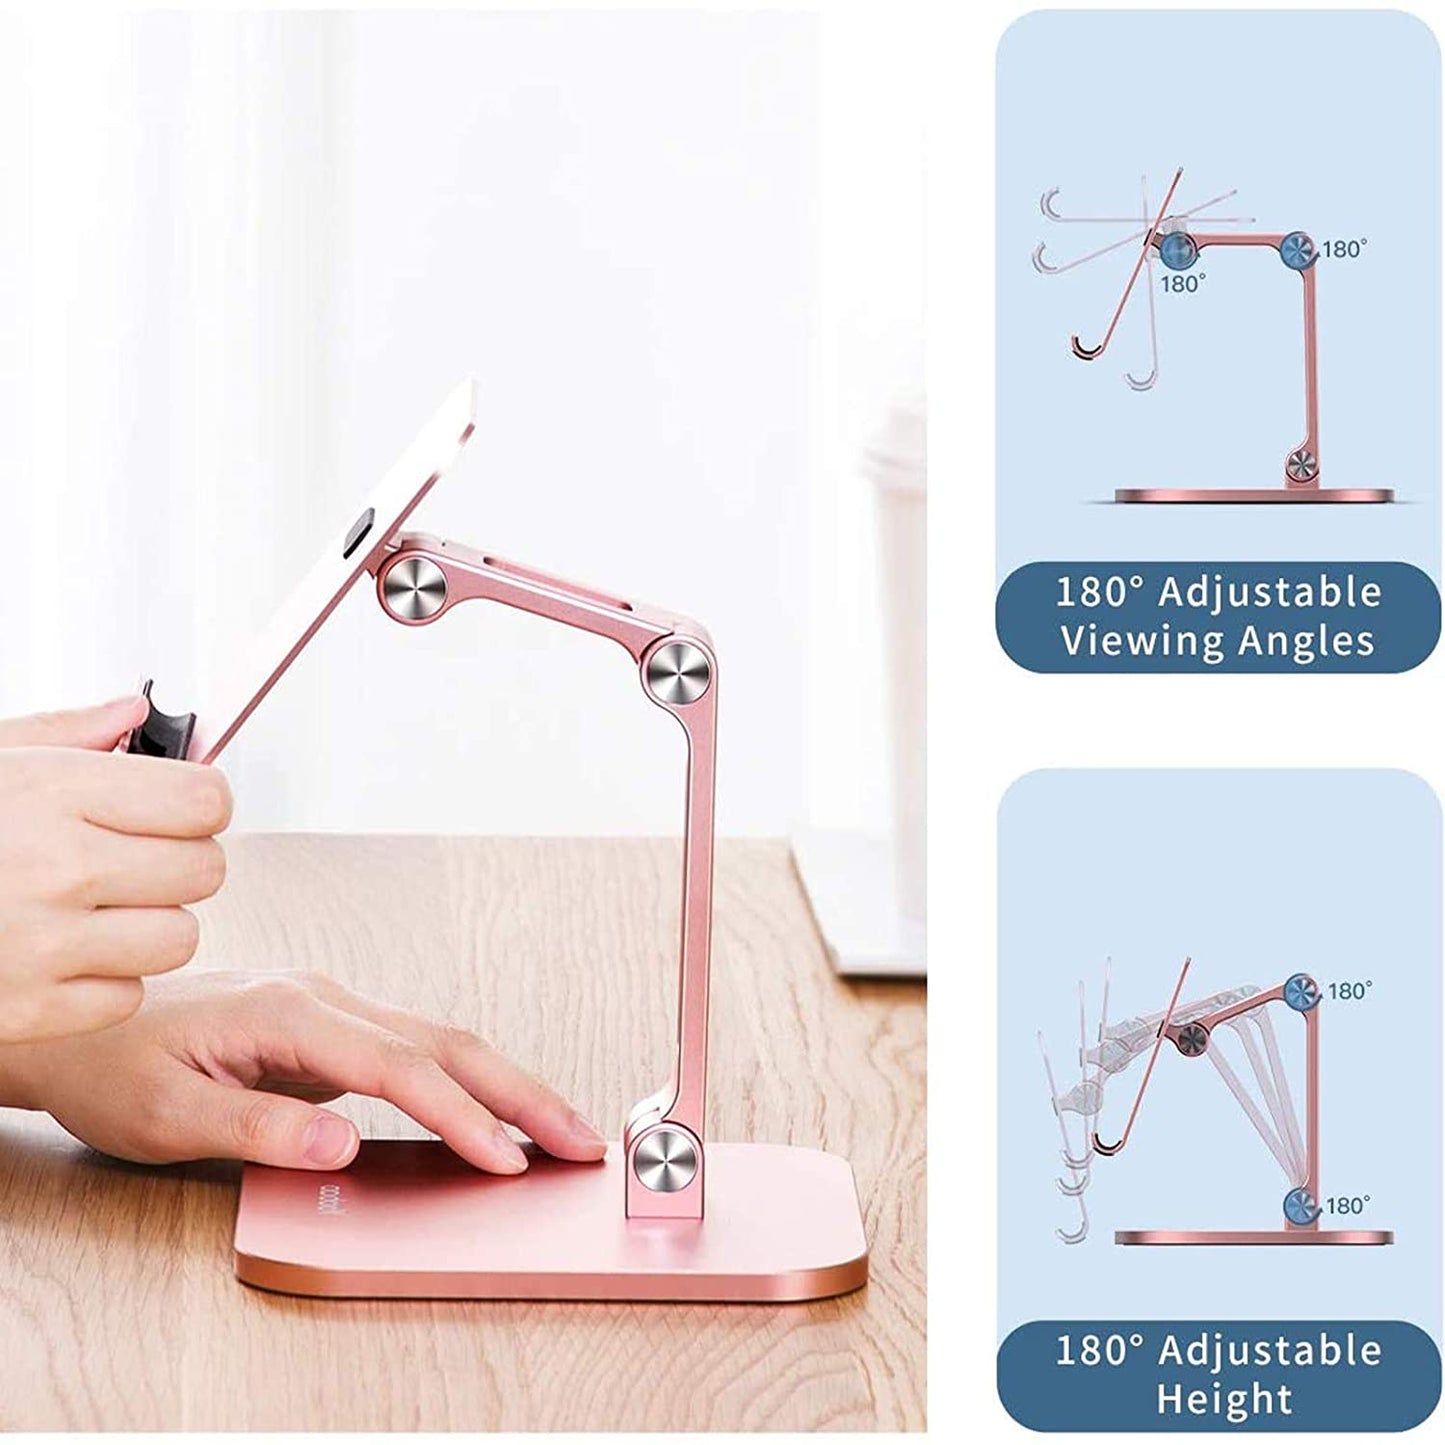 Yoobao B2L Foldable Aluminum Stand 180 Degrees Adjustable for Phone, Tablet, iPad Stand Holder (Grey, Rose Gold)